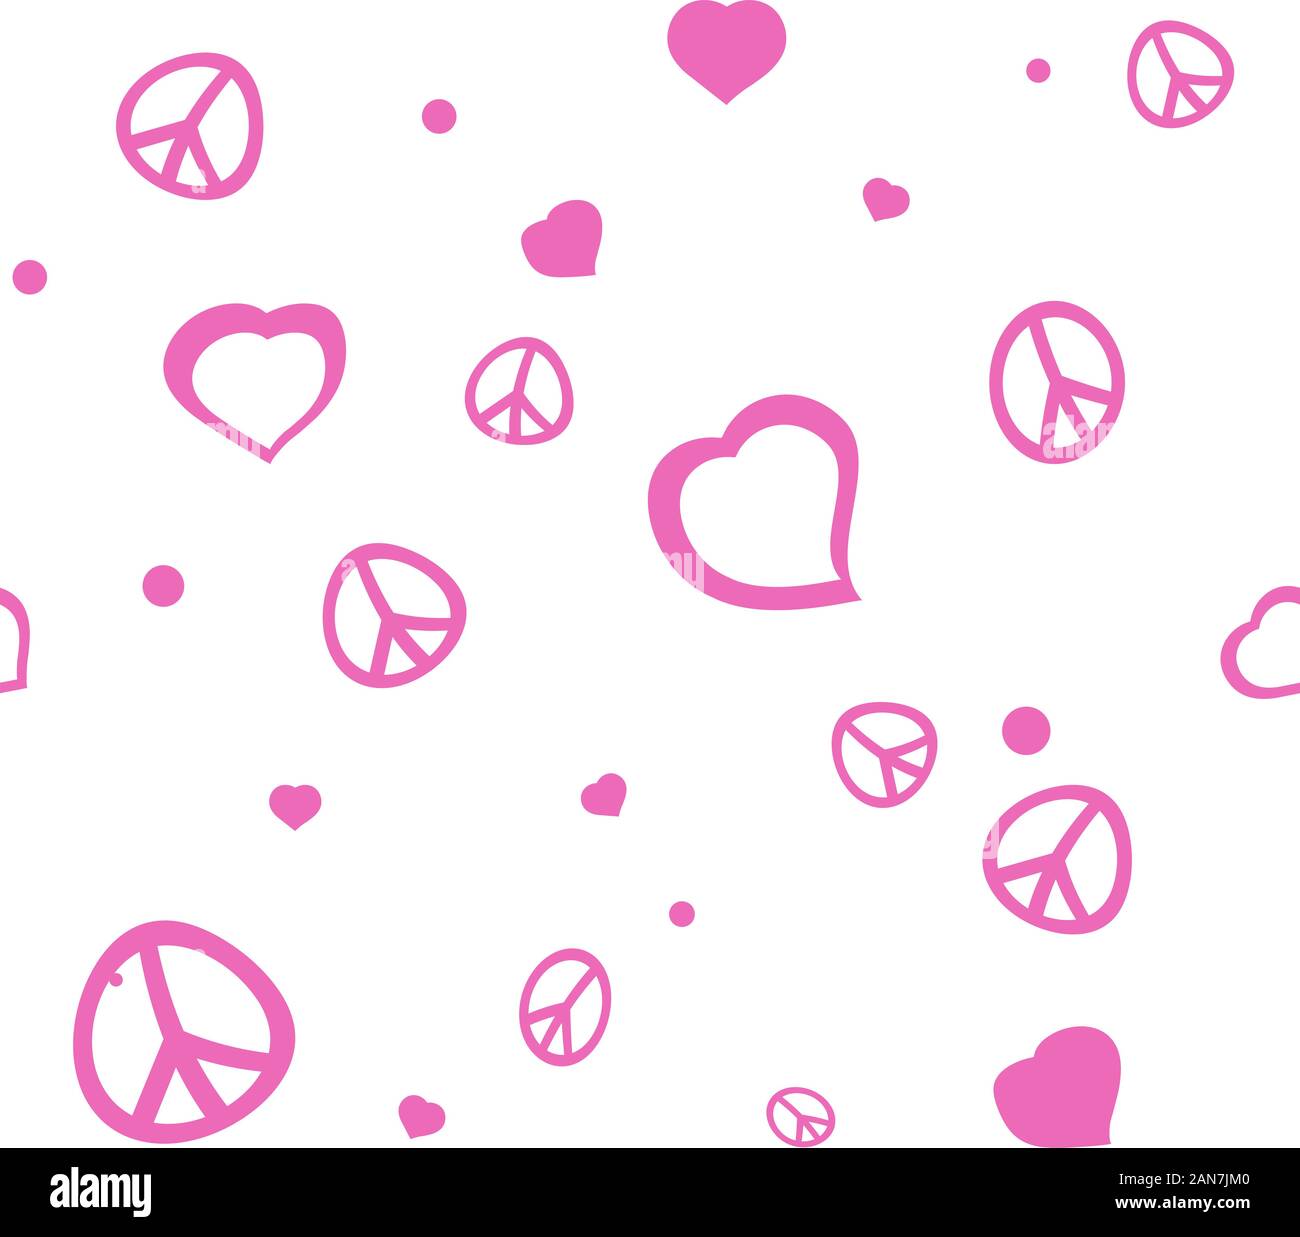 Peace and love elements seamless pattern background. Clothing, editable. Stock Vector